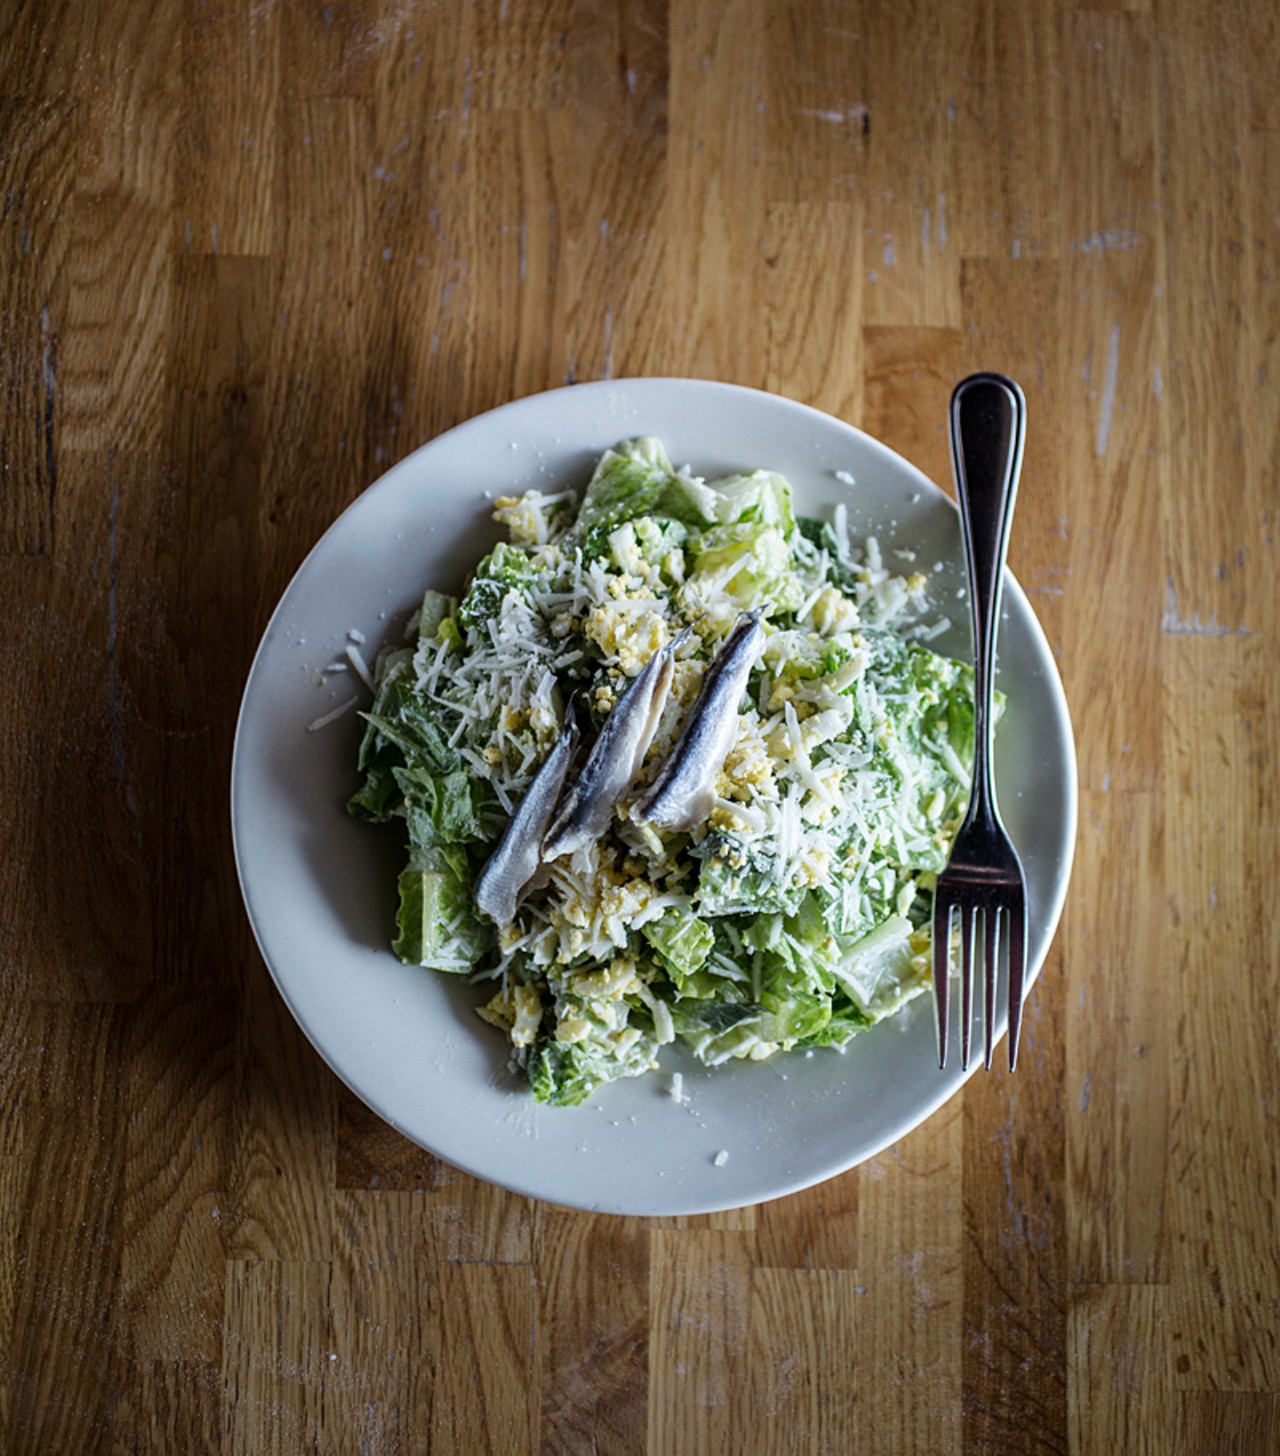 The Caesar salad is made with egg and parmigiano, and it has the additional option of anchovy.